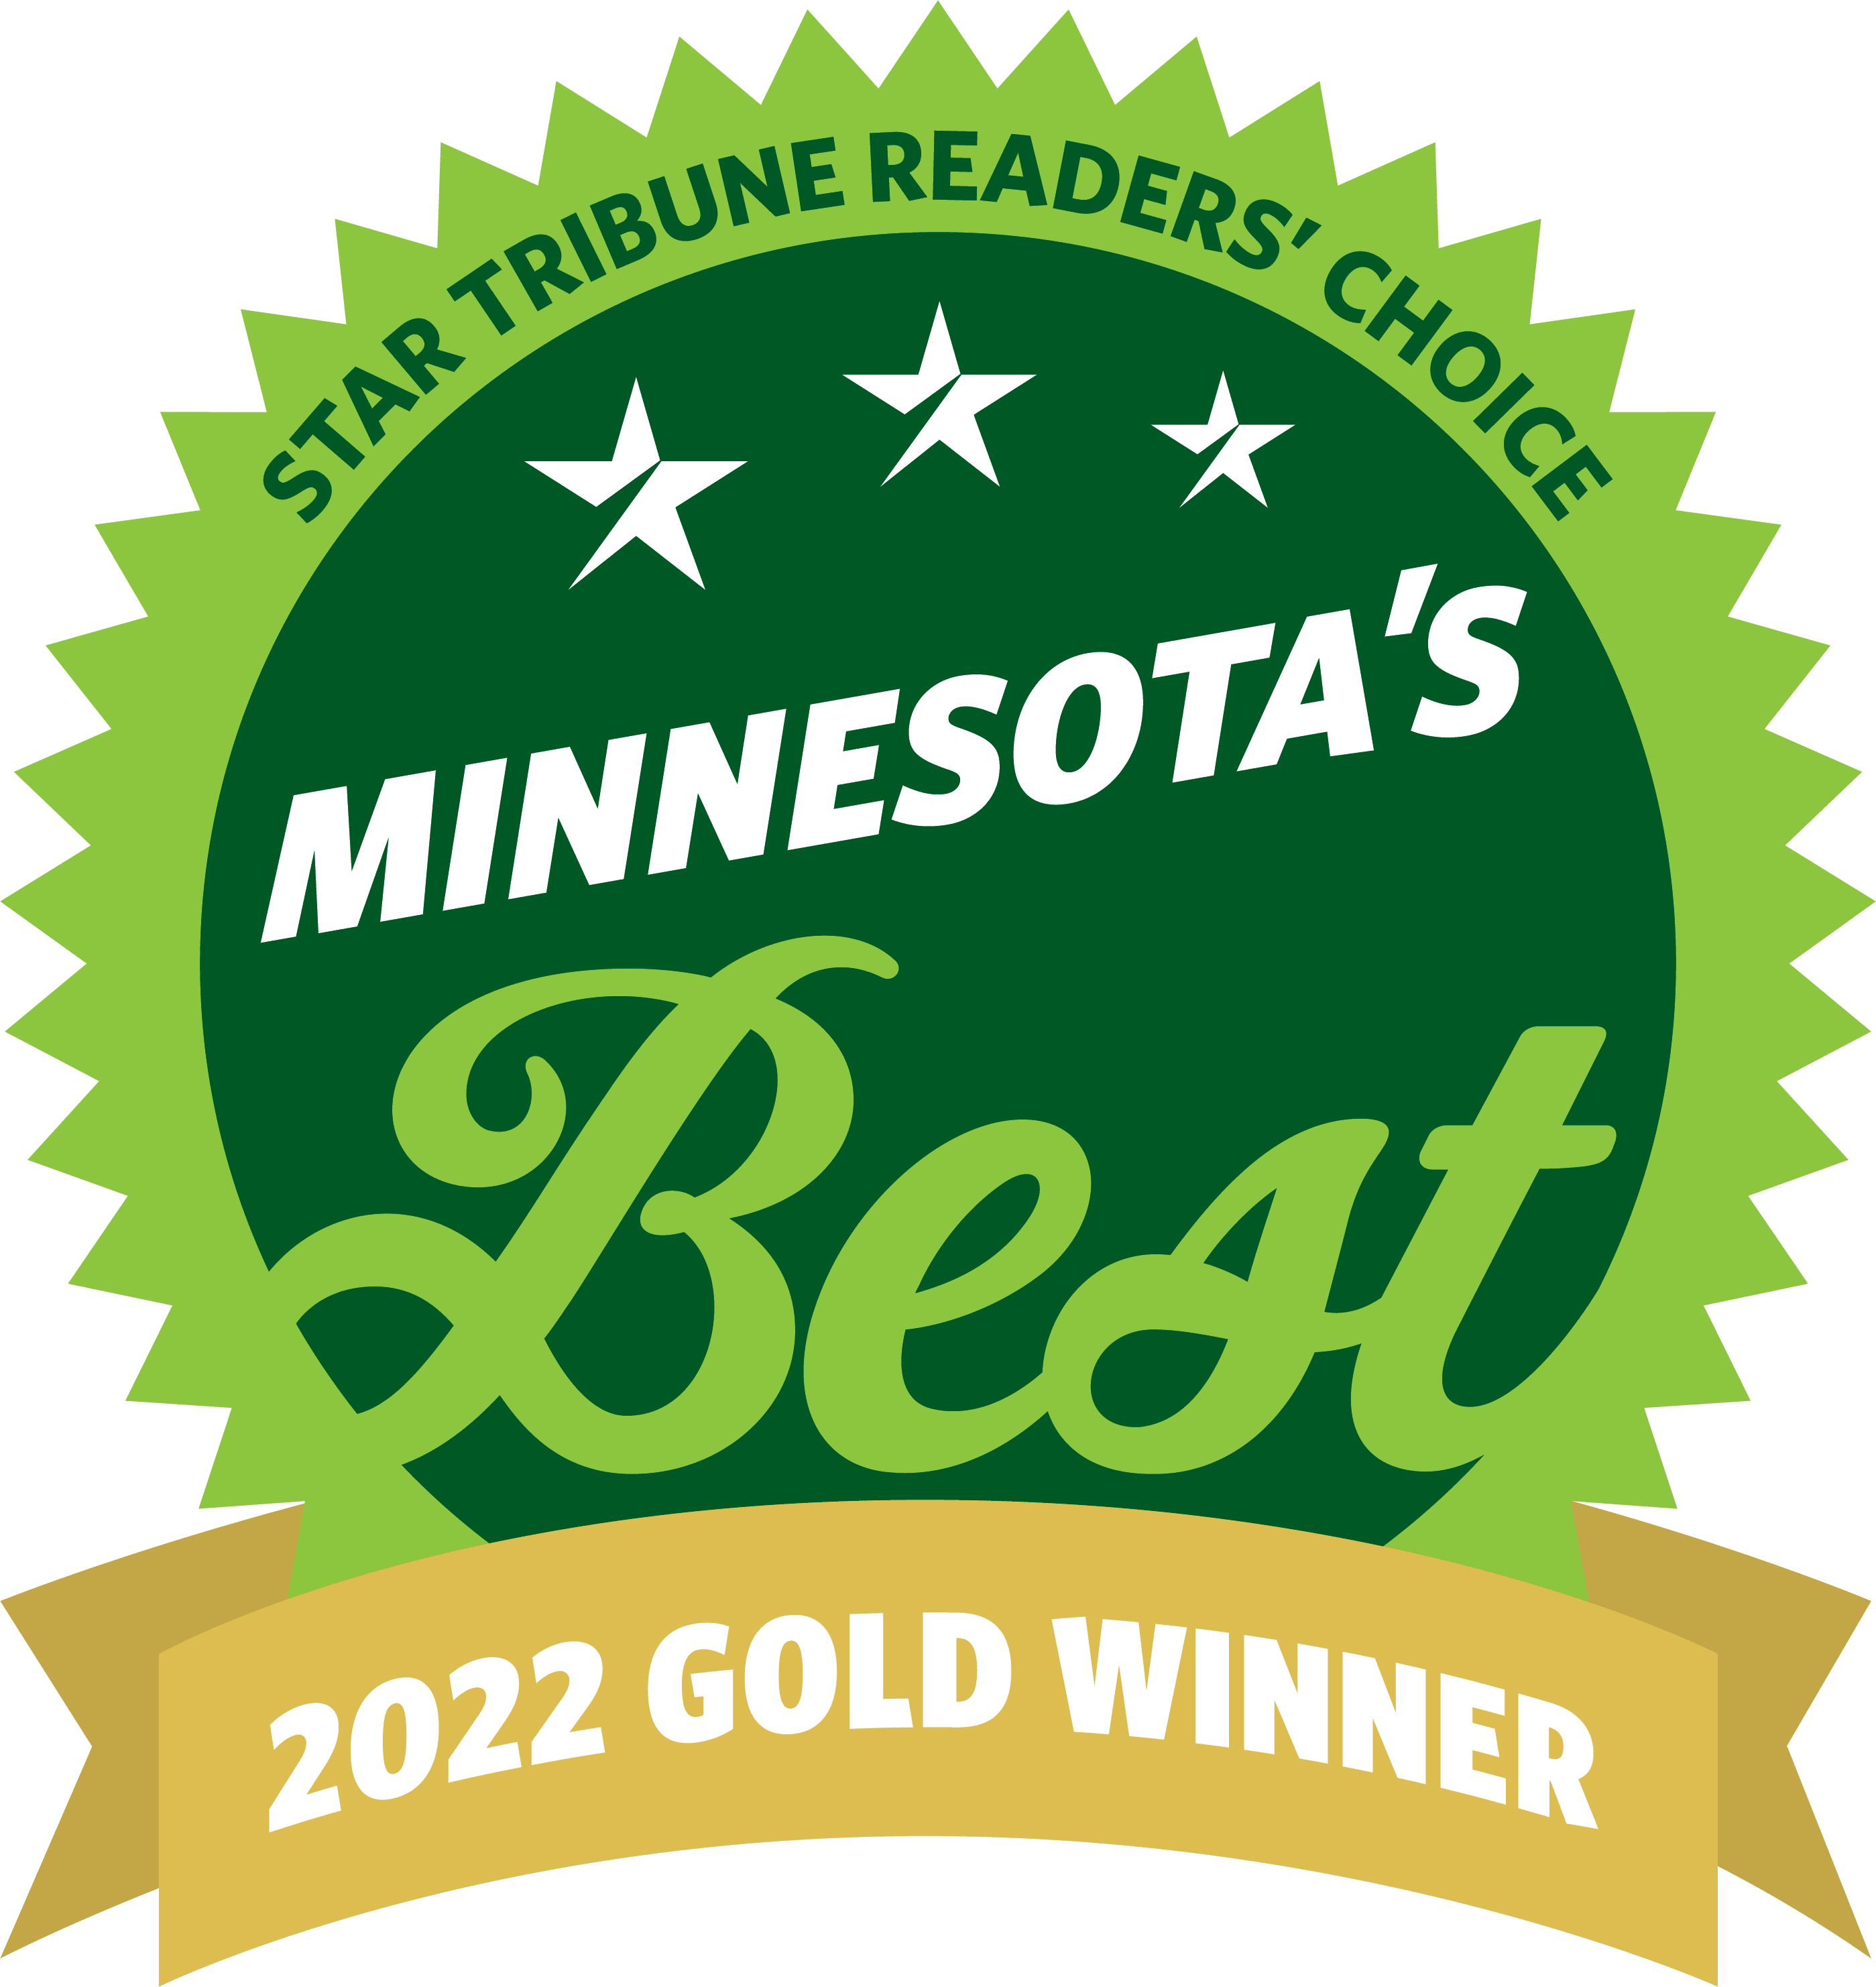 Minnesota Best Award for Applewood Pointe of Apple Valley 